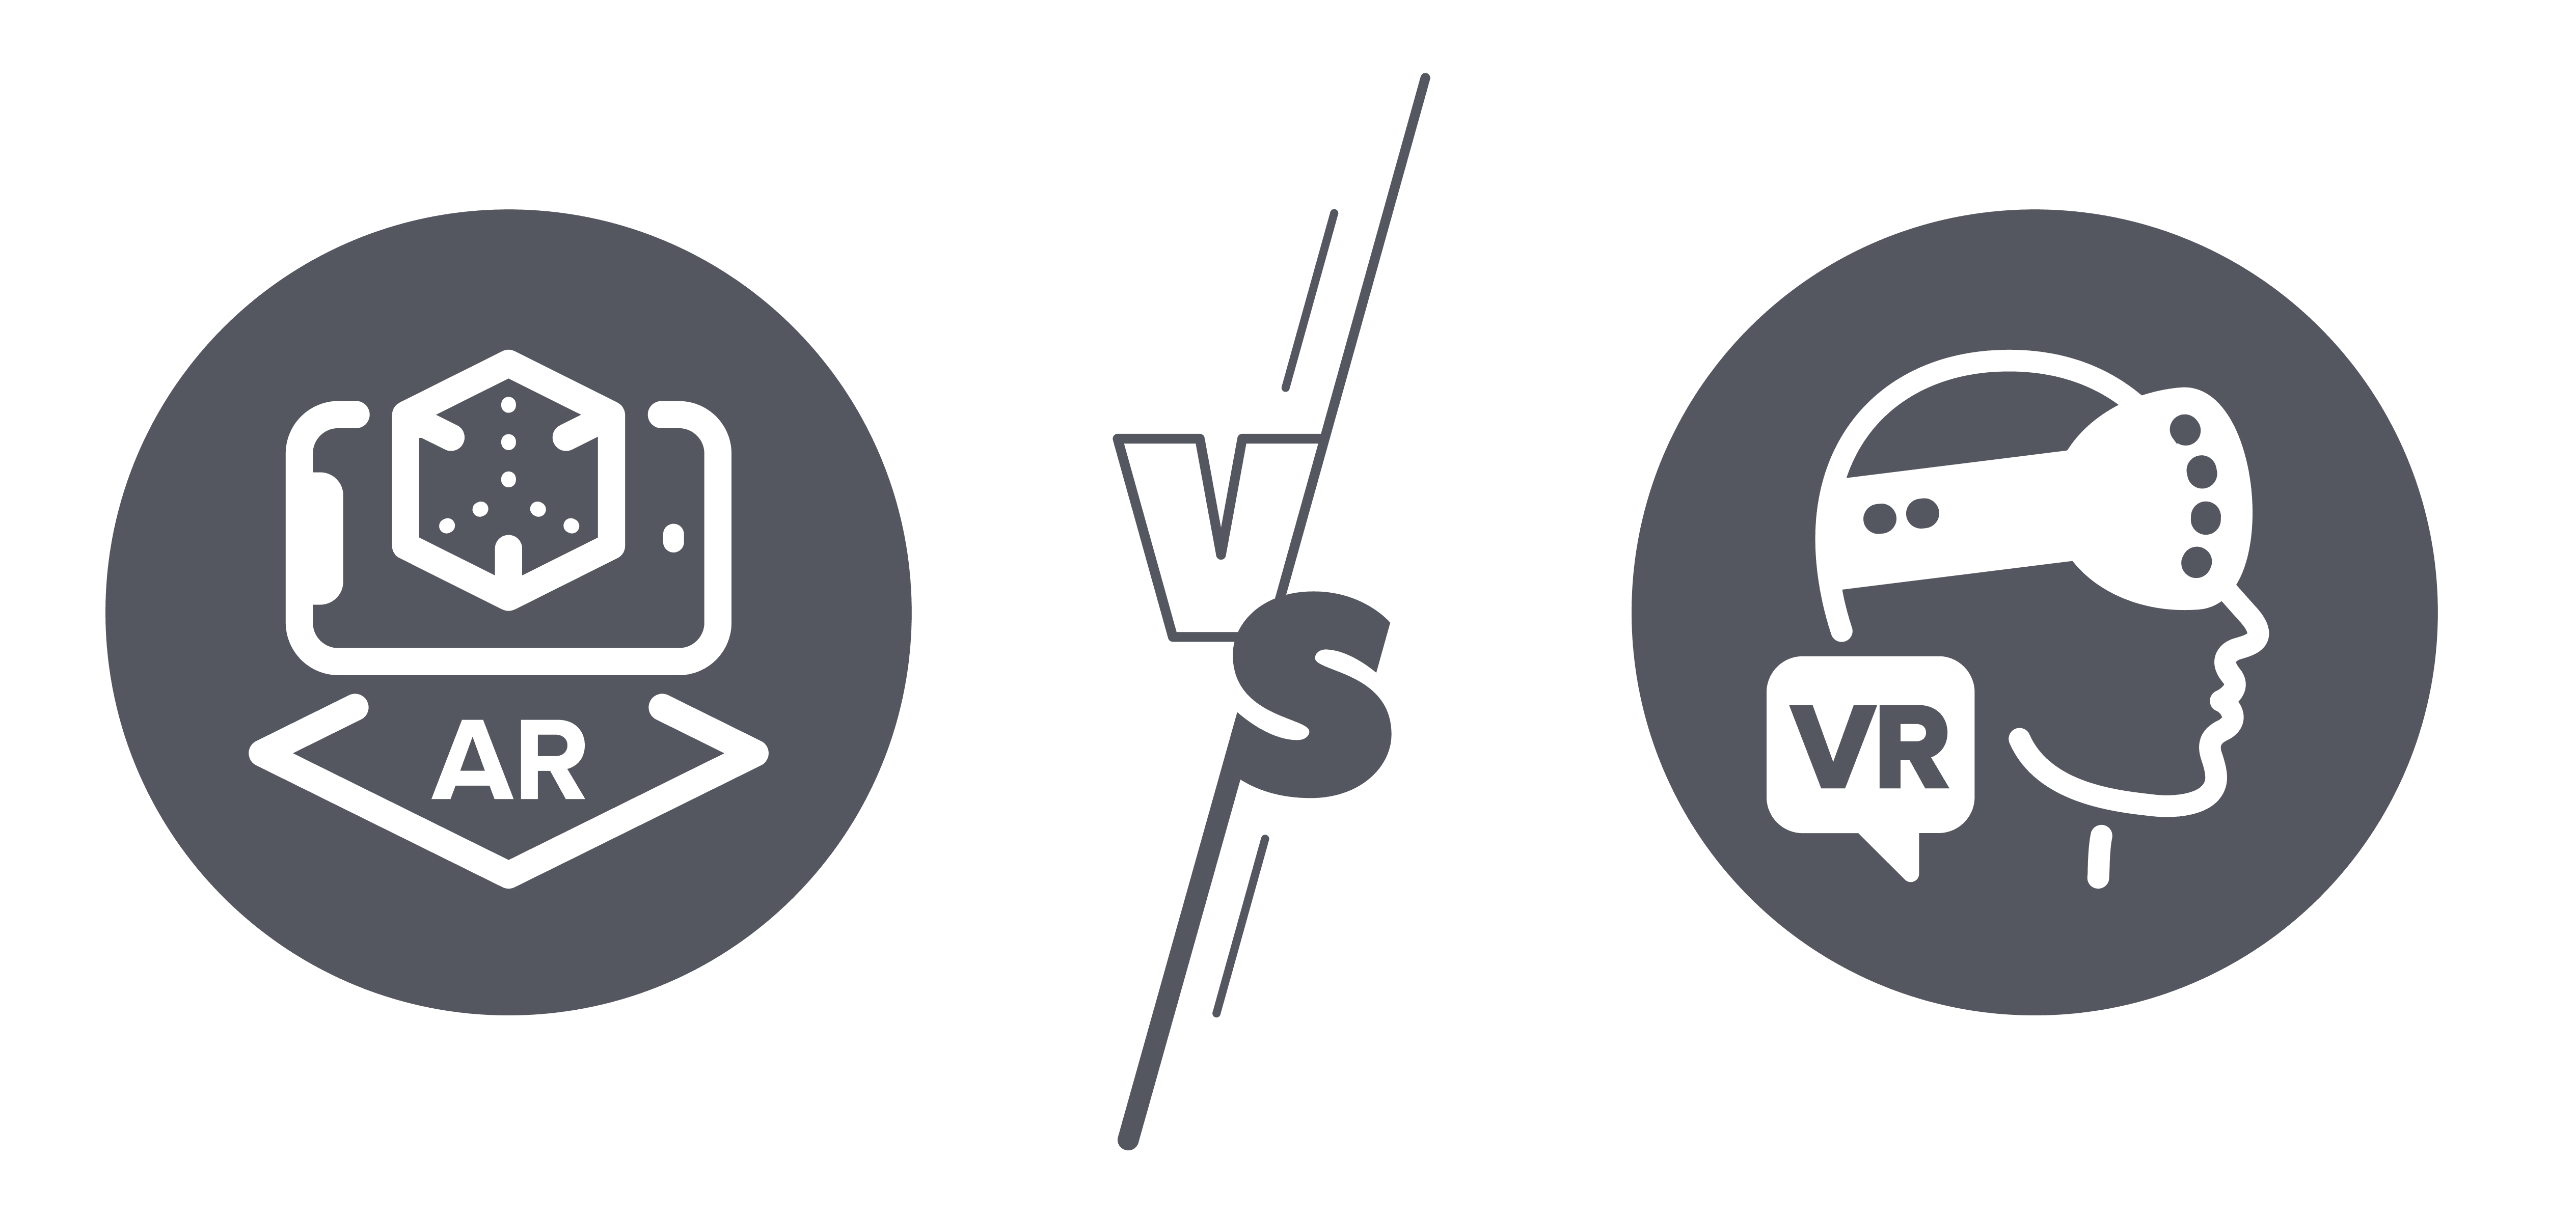 An icon on the left representing AR and one on the right for VR with 'VS' written between them.